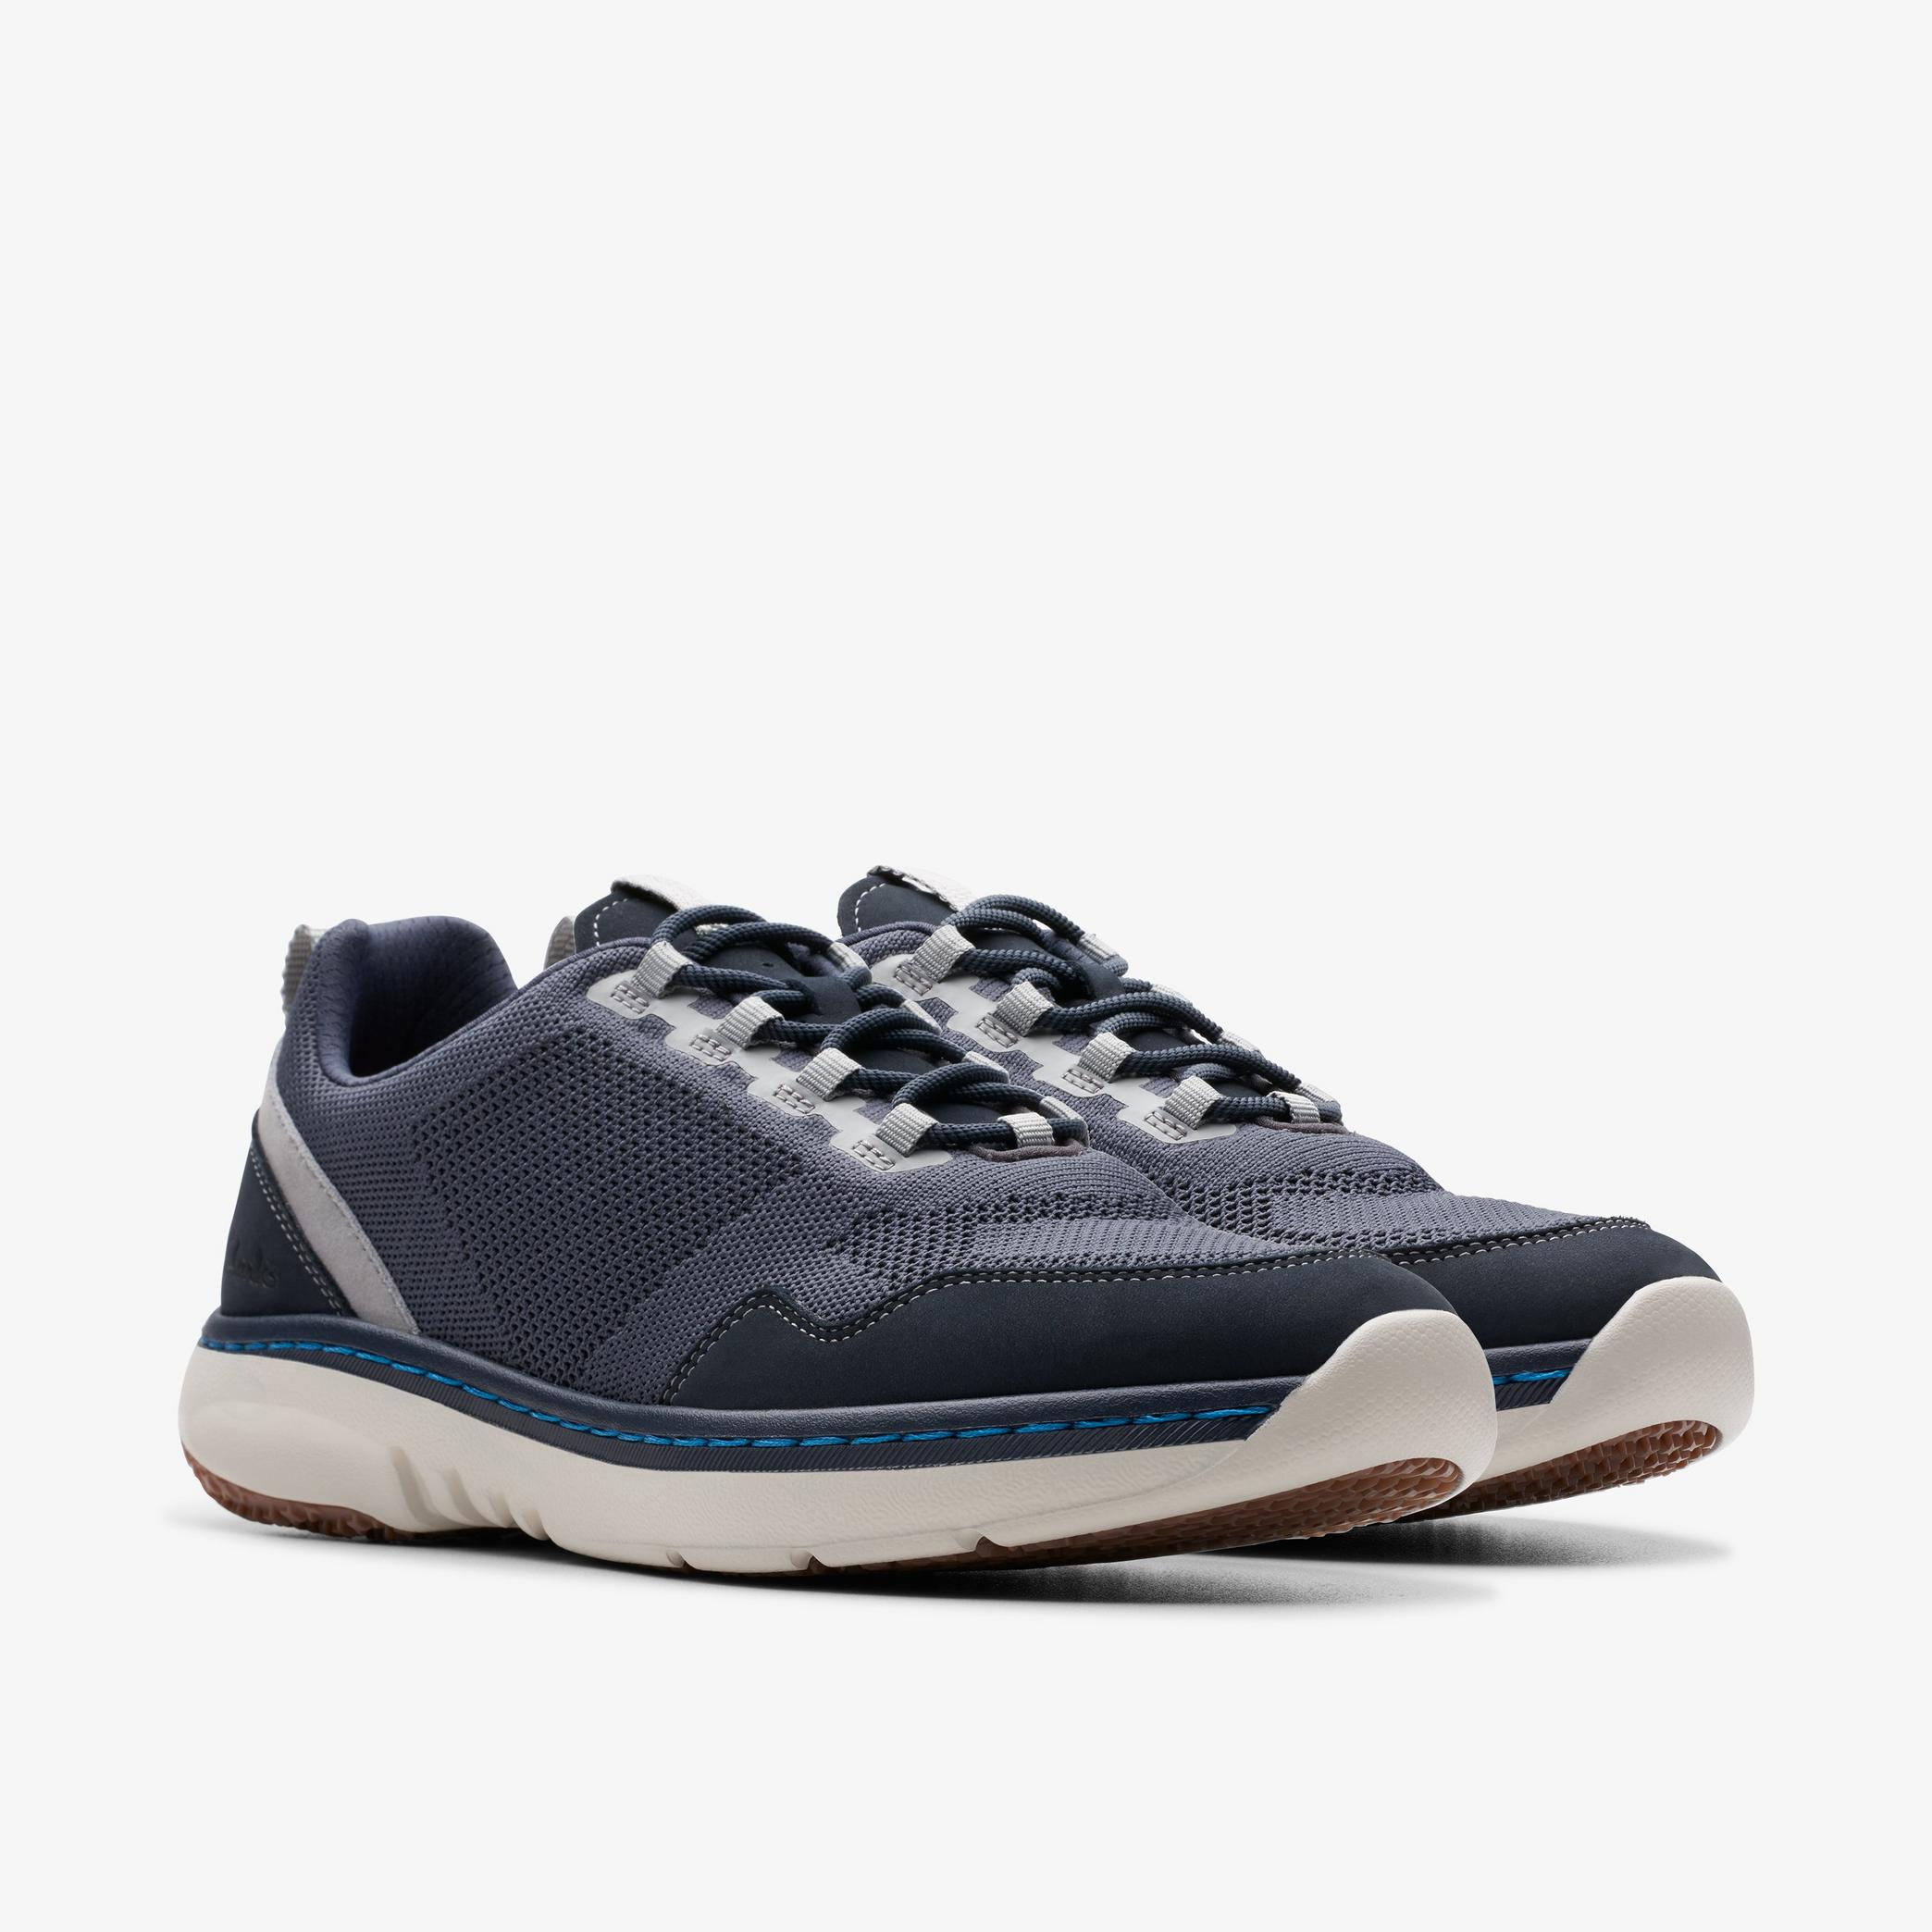 Clarks Pro Knit Navy Combination Sneakers, view 4 of 6